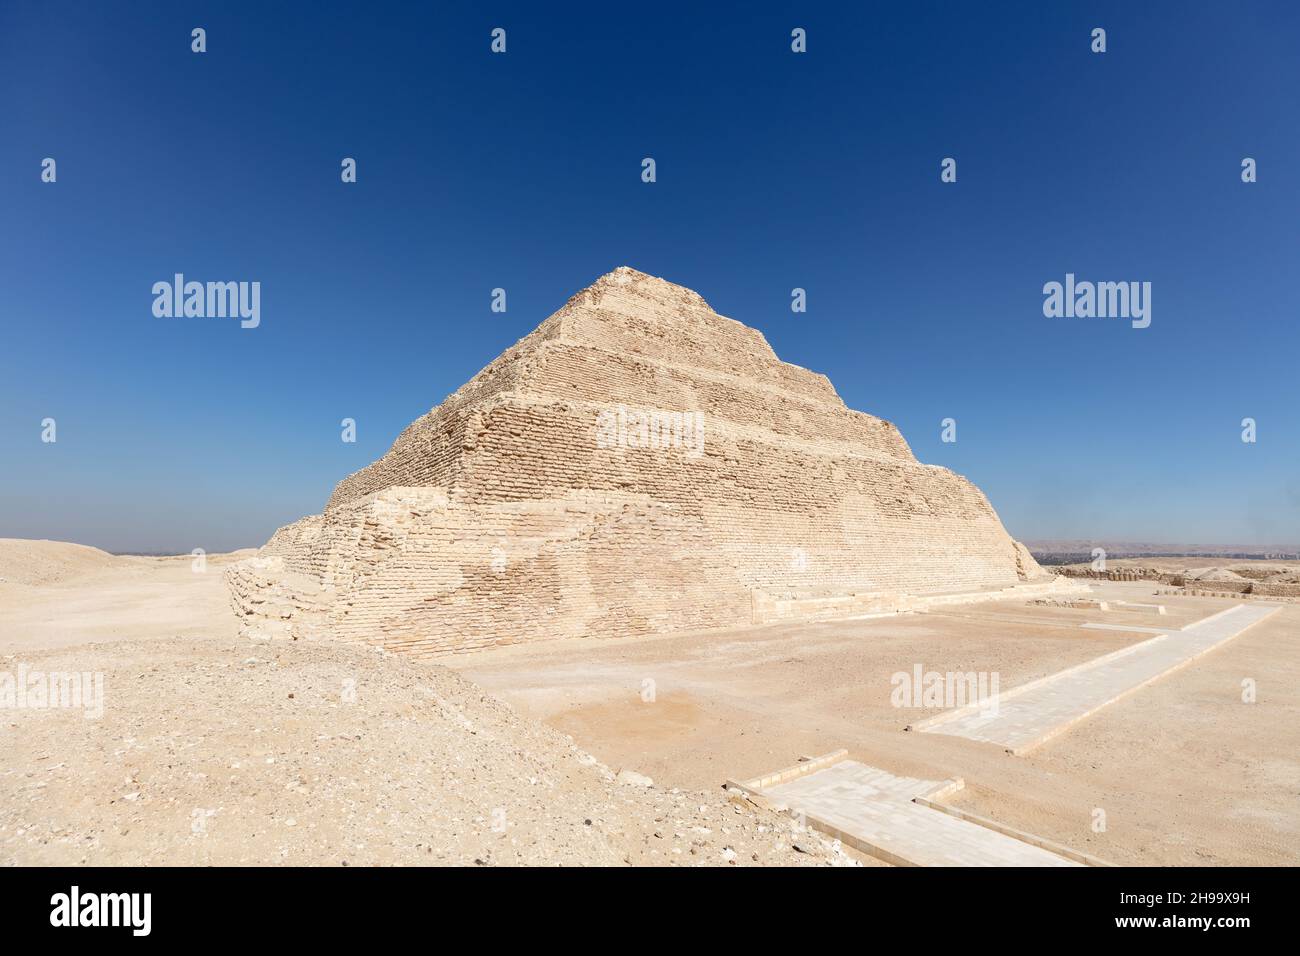 Unique white egyptian pyramid with the blue sky on the background. Stock Photo